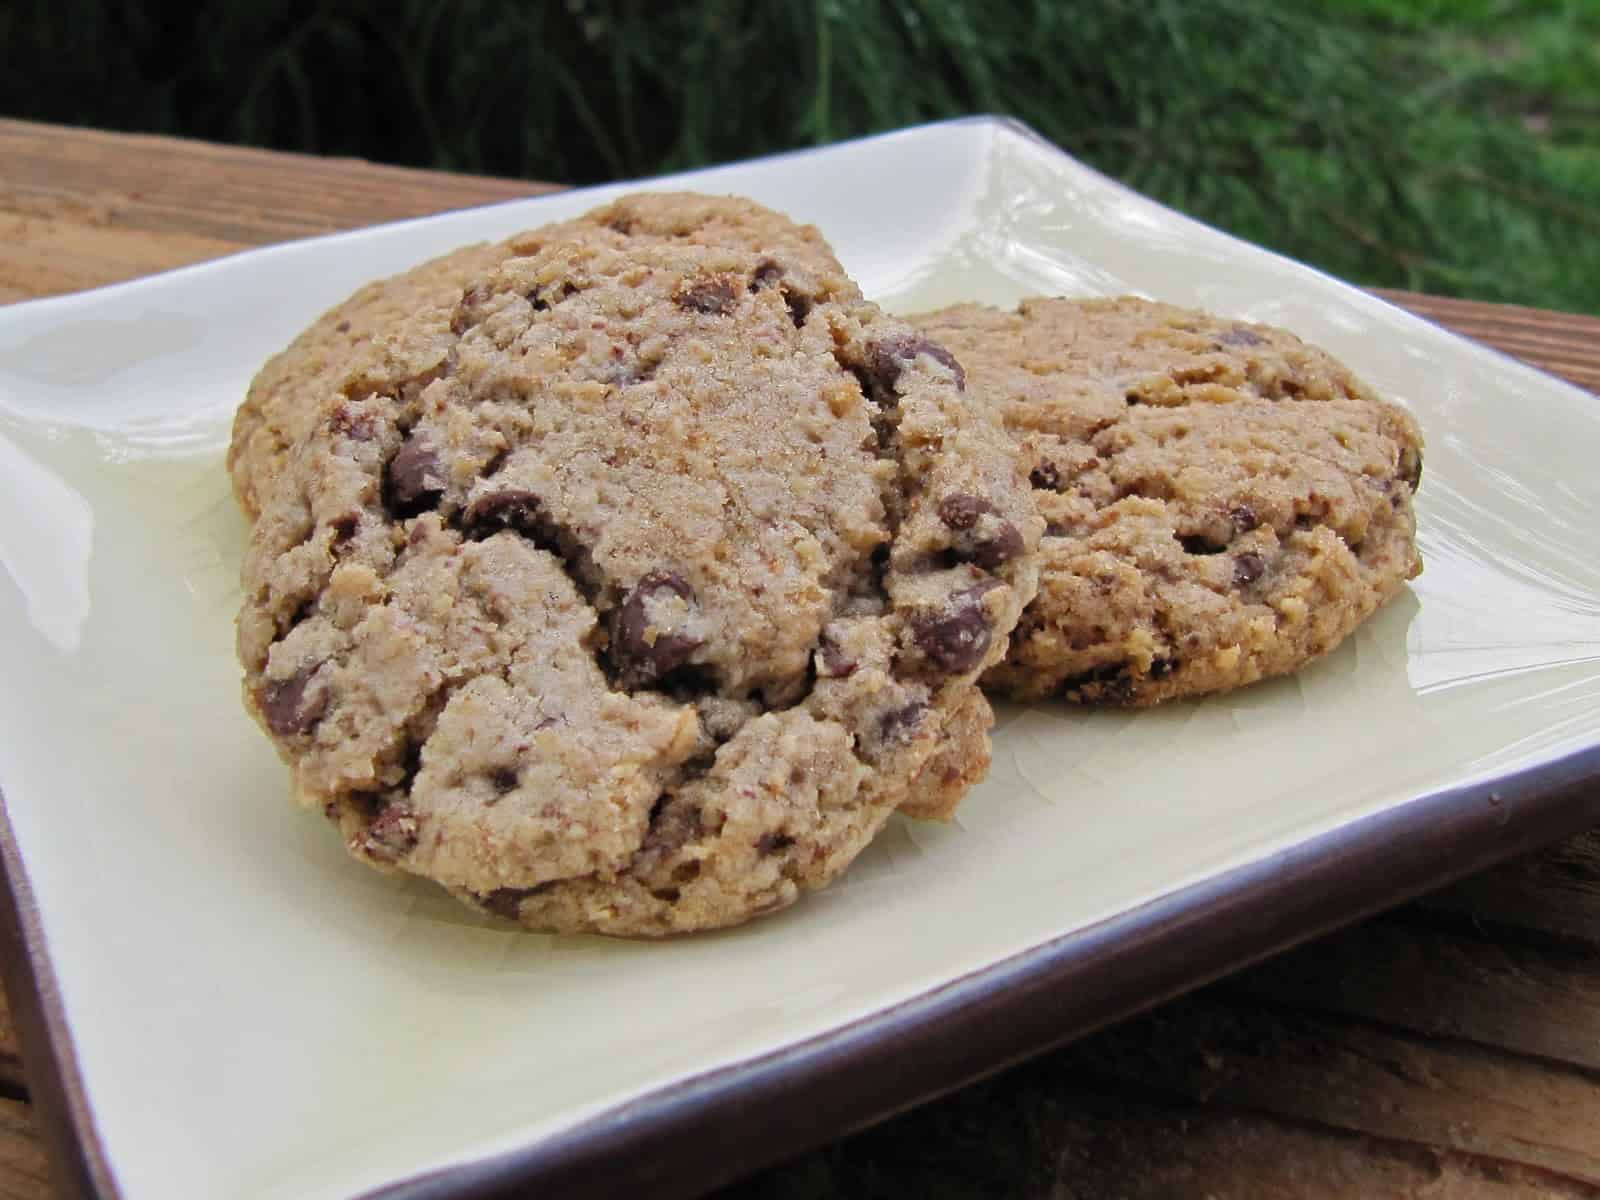 Oatmeal Chocolate Chip Cookies, sometimes called Neiman Marcus Cookies, on a small square plate.